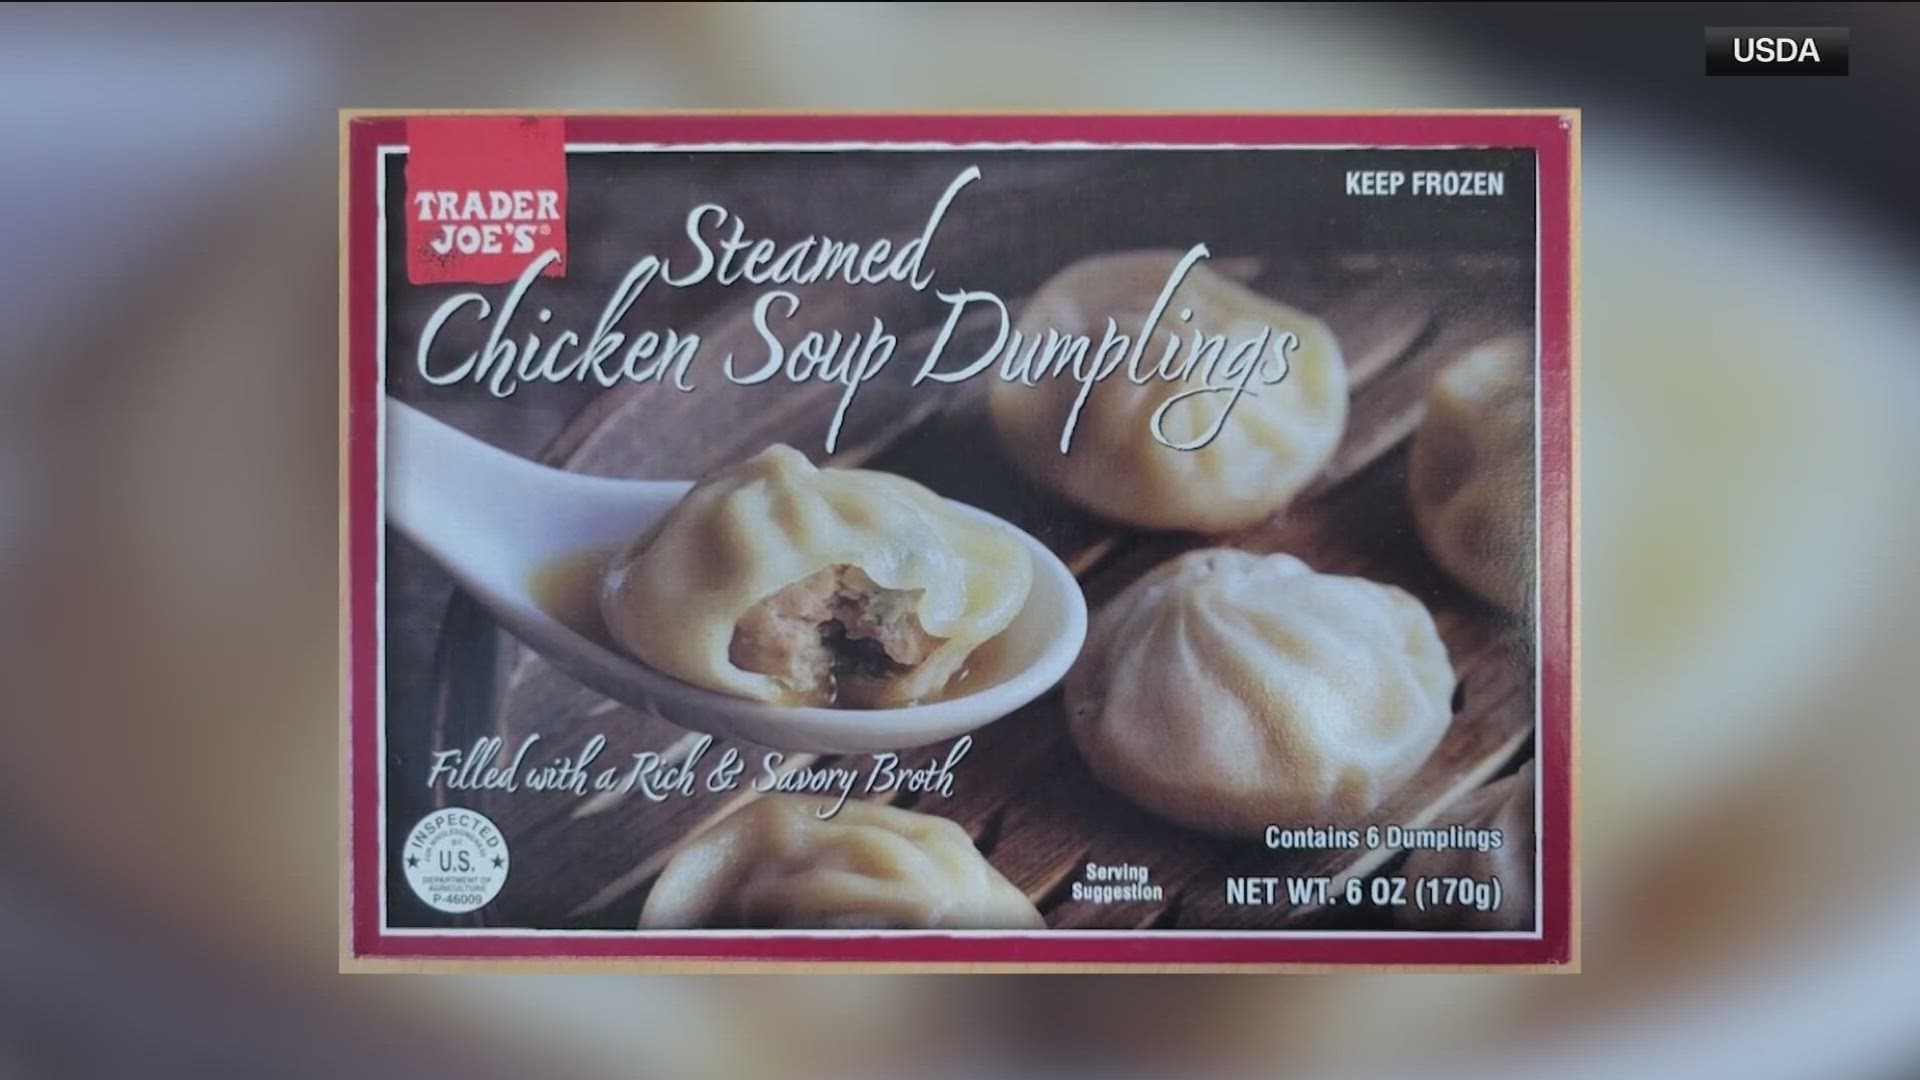 The company is recalling over 61,000 pounds of the dumplings.